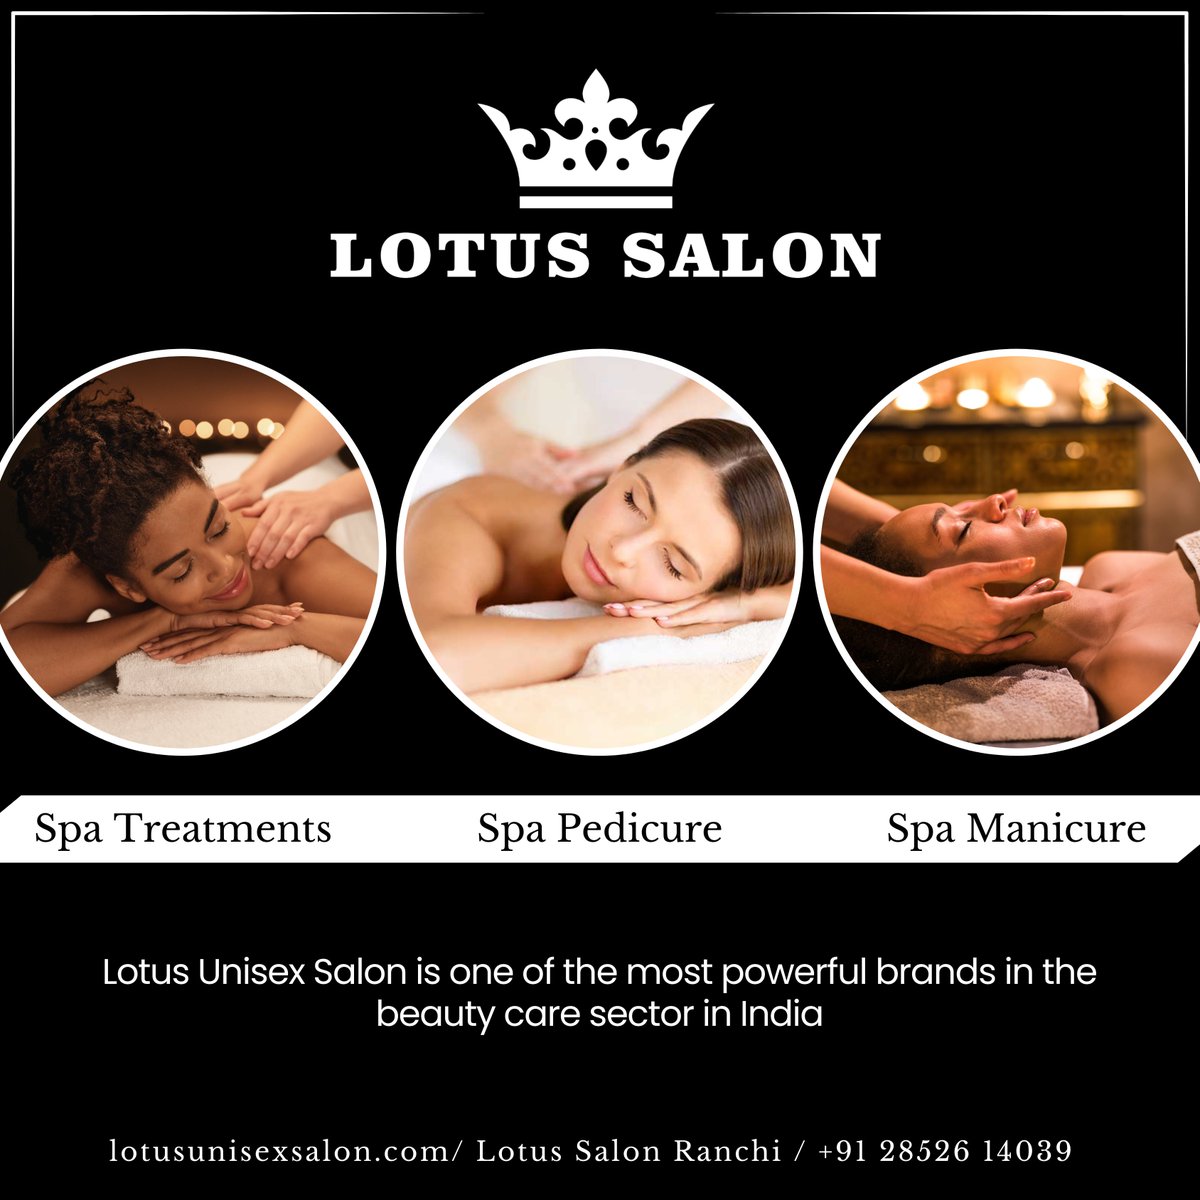 Feel your best with our luxurious body care treatments at Lotus Salon.

For more info visit :lotusunisexsalon.com
Appointment / Inquiries : 8252614039

#bodycare #bodymassagespa #Lotus #lotussalon #lotussalonranchi #lotussalonfranchise #Ranchi